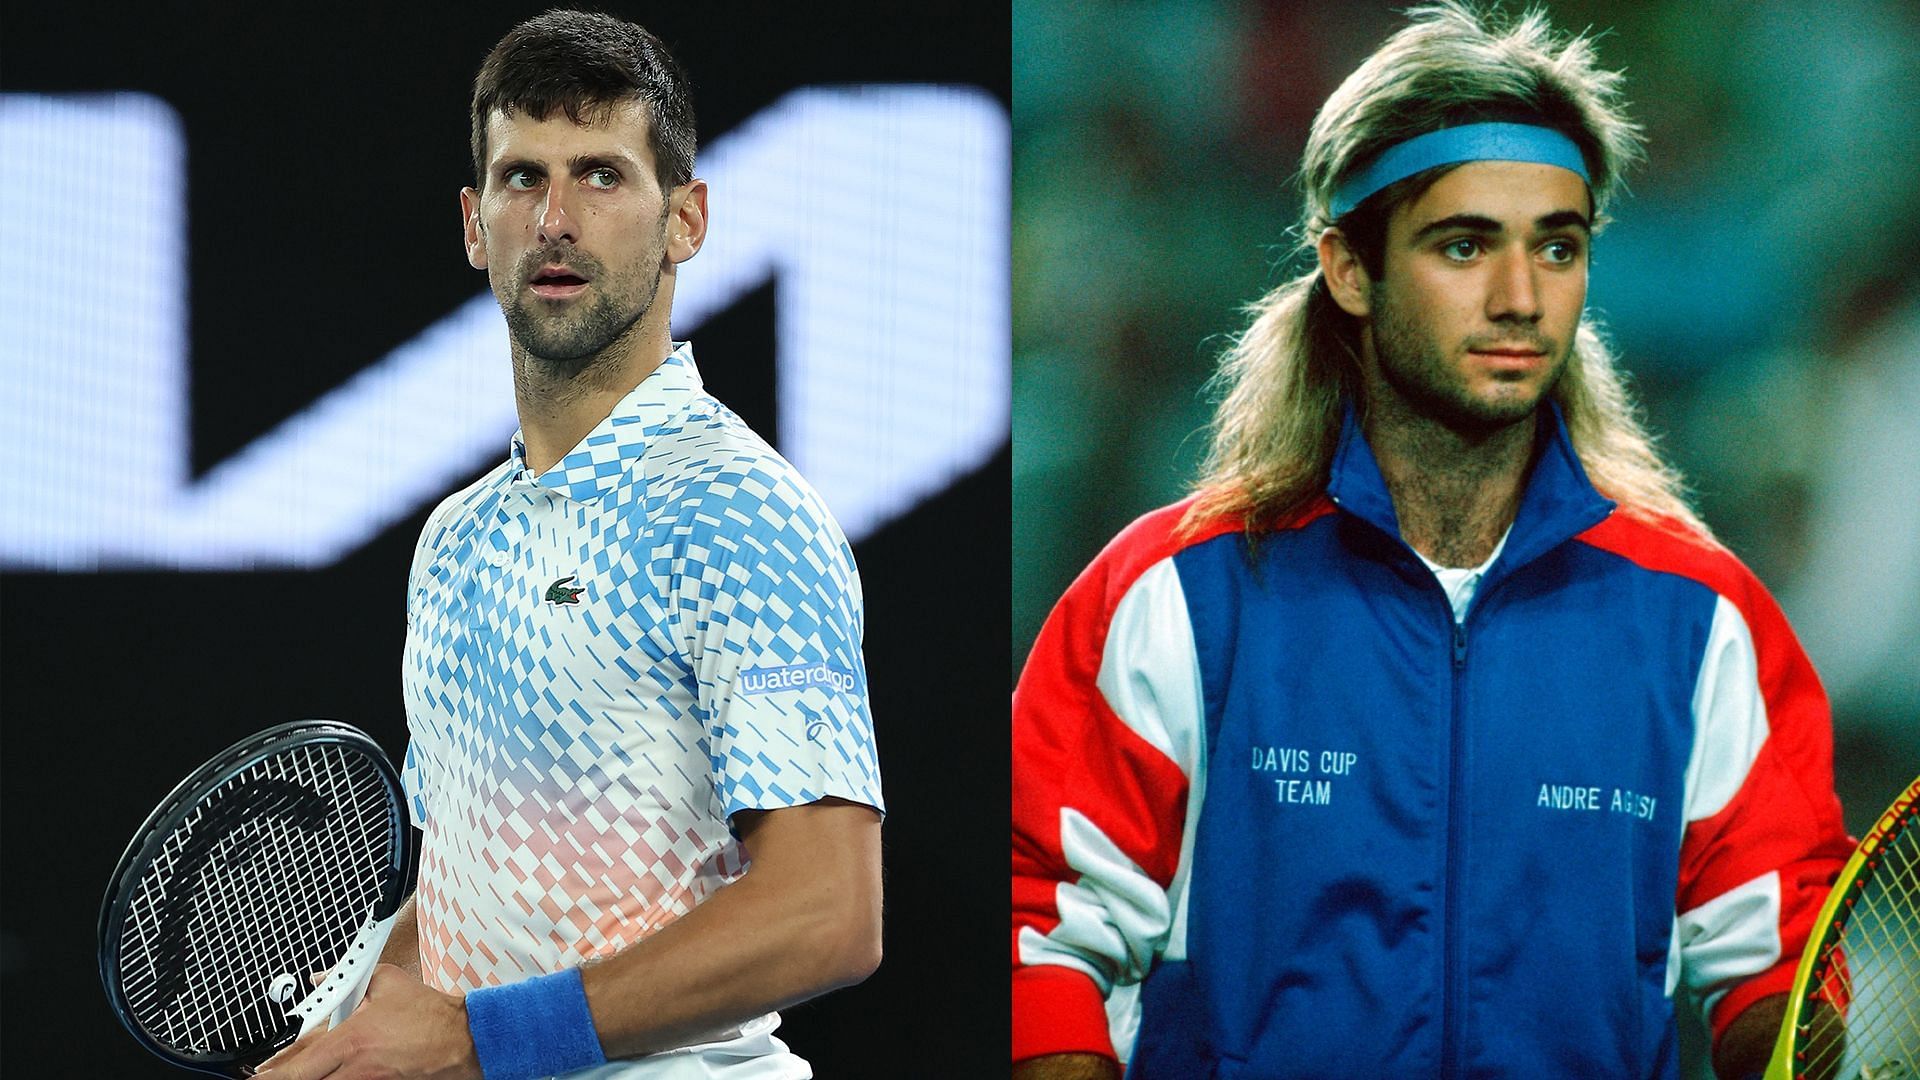 Novak Djokovic vs prime Andre Agassi at Australian Open Americans former coach predicts who will win in hypothetical match-up